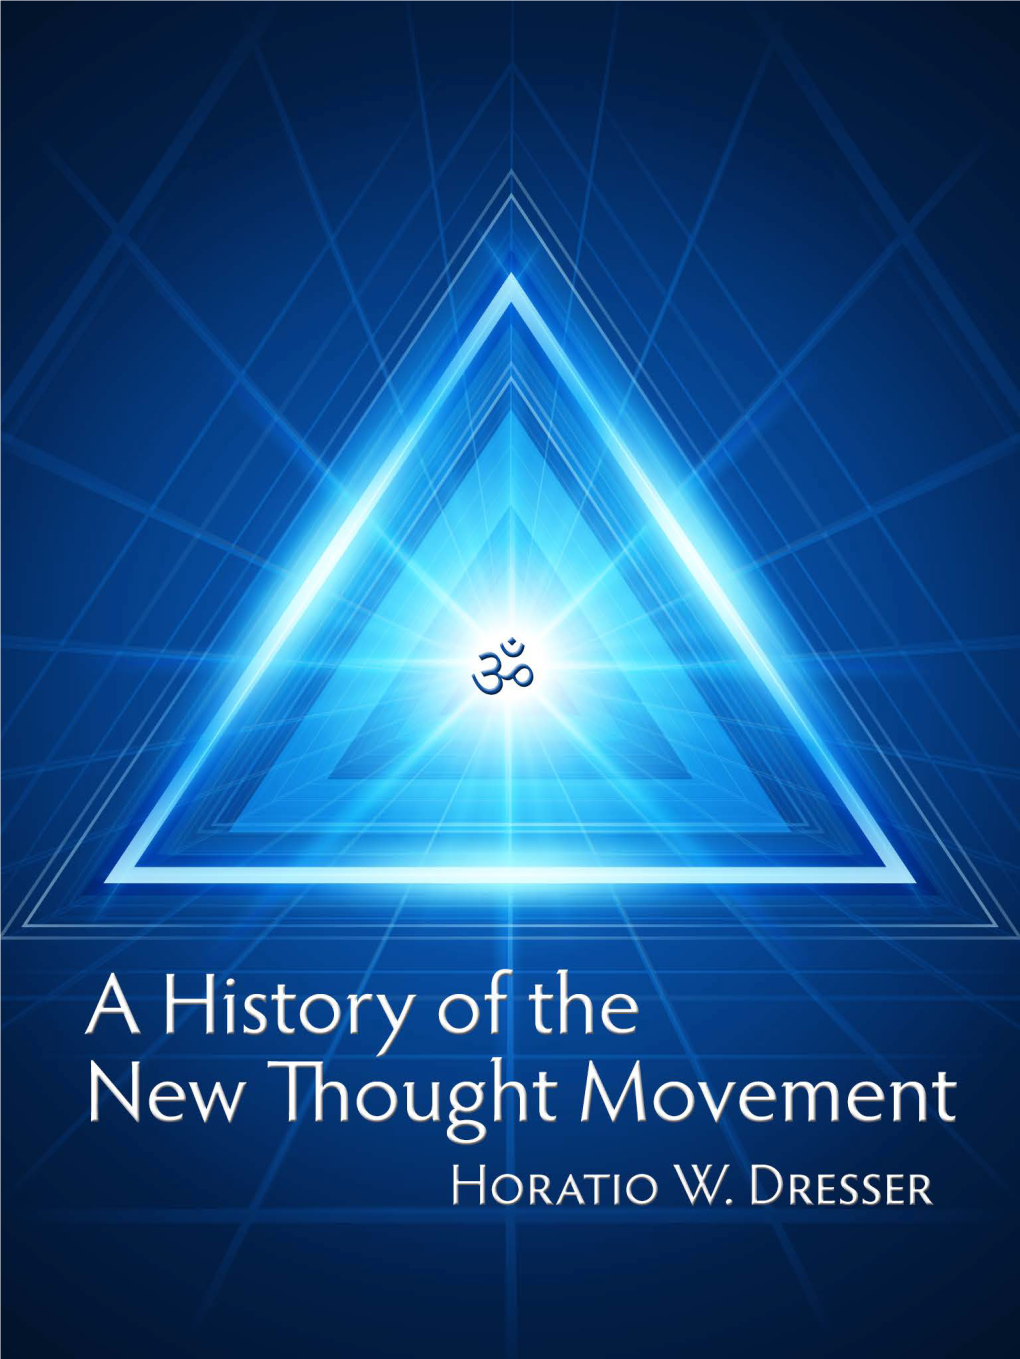 A History of the New Thought Movement by Horatio W. Dresser